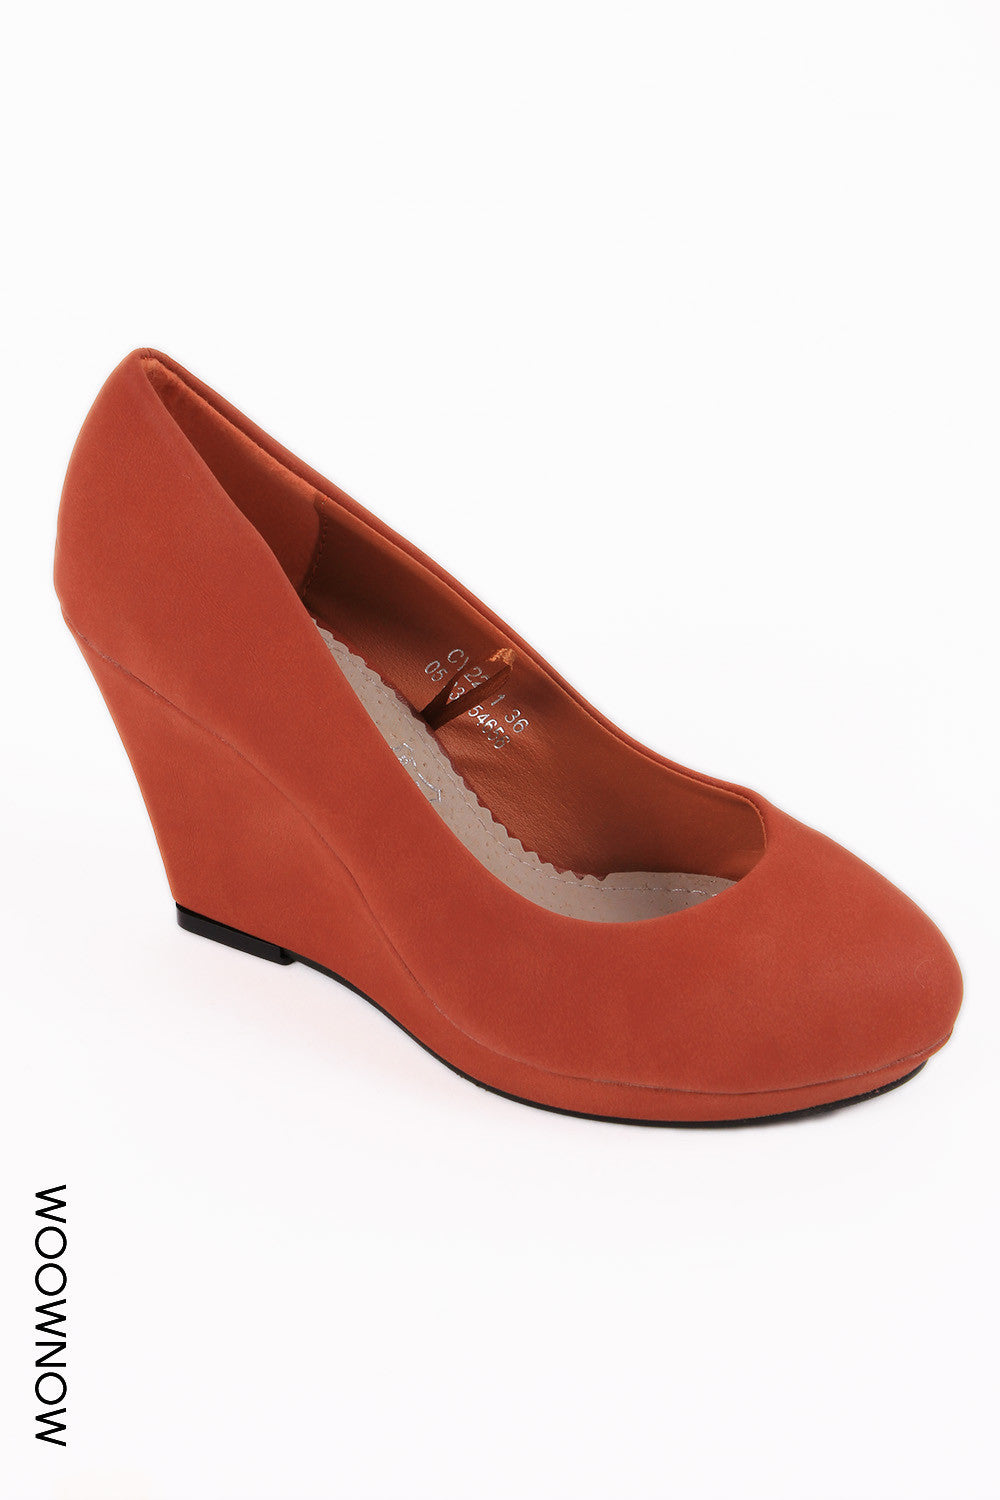 Sally Leather-Look Wedge Court Shoes